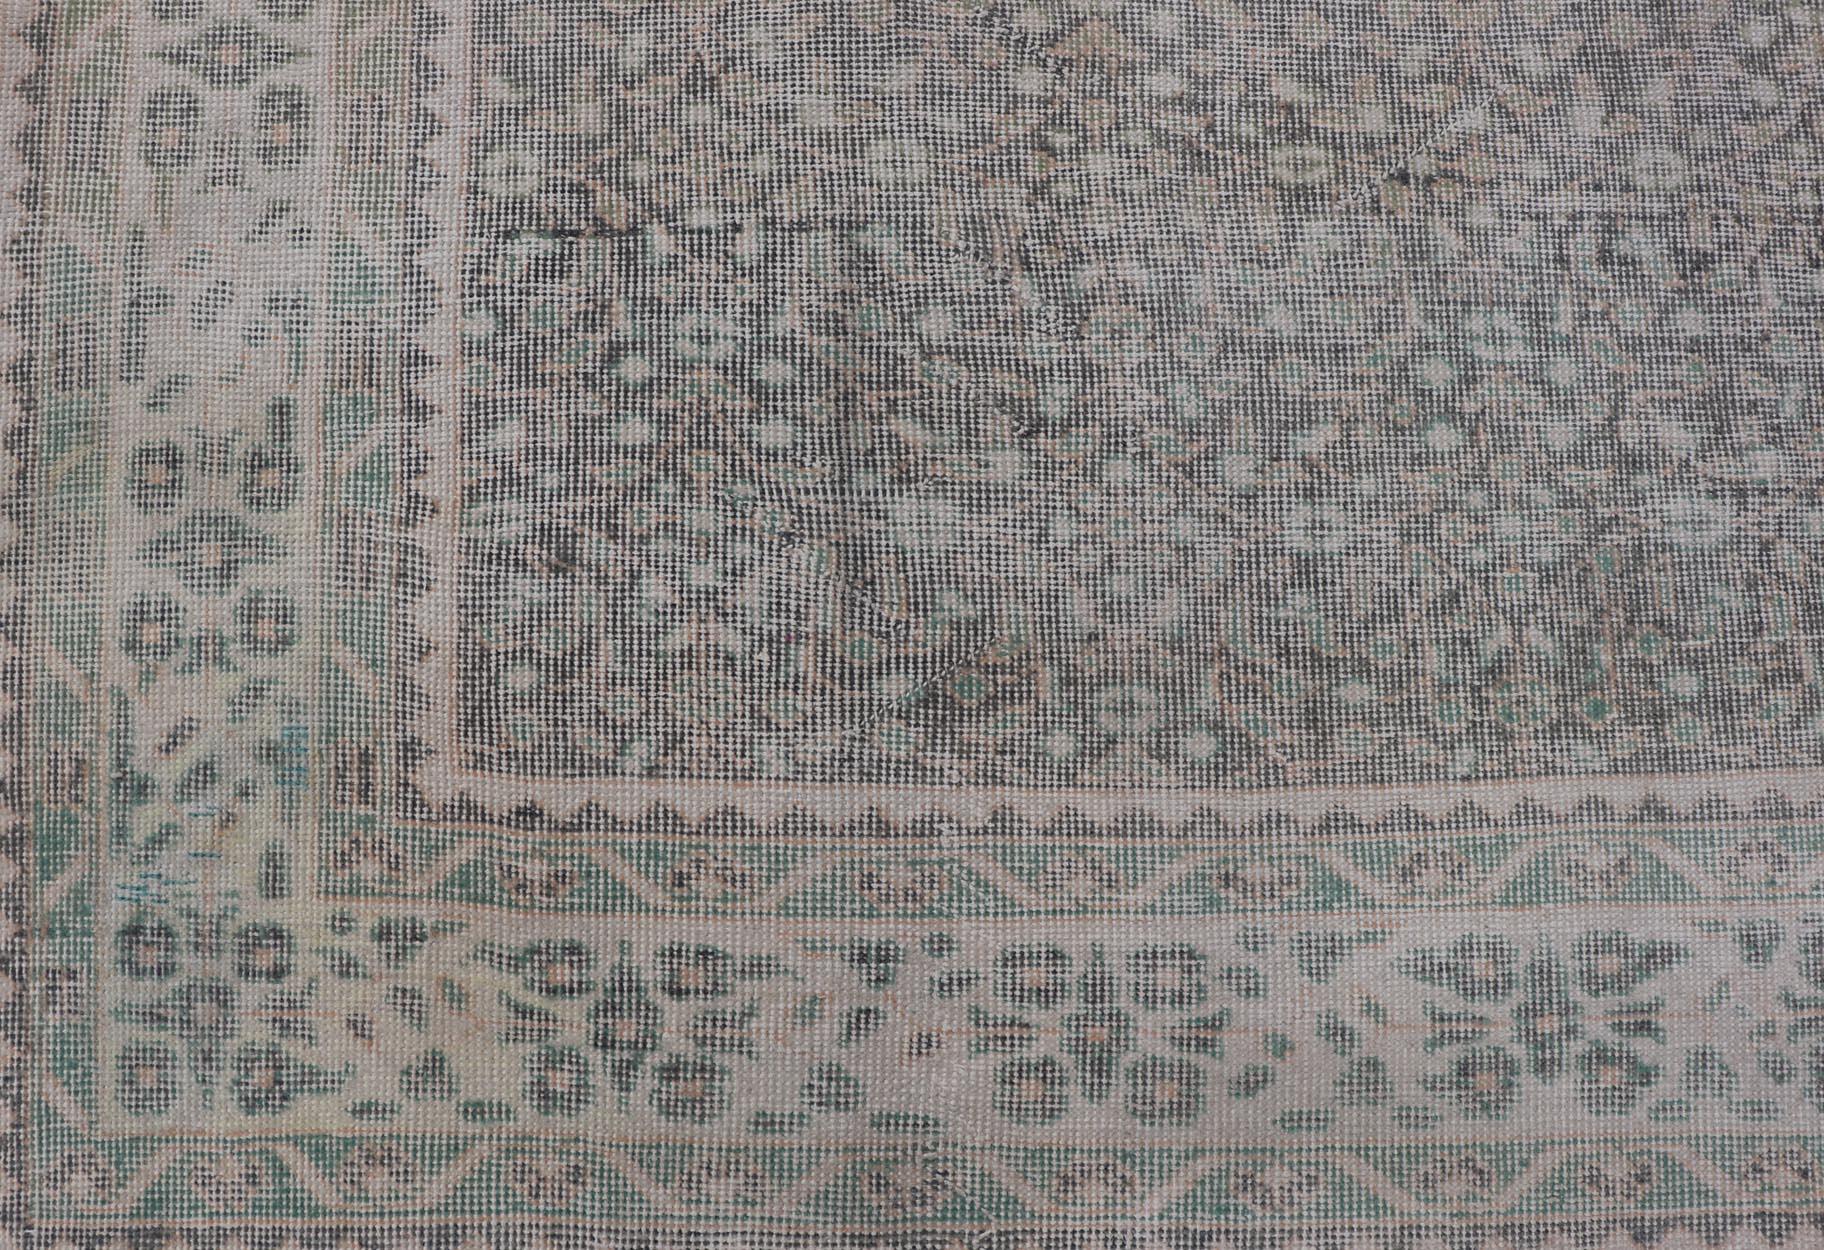 This vintage Turkish Oushak rug has been hand-knotted in wool and features an all-over sub-geometric distressed floral design rendered in cream, blue, green and ivory tones. A complementary, multi-tiered border encompasses the entirety of the piece;